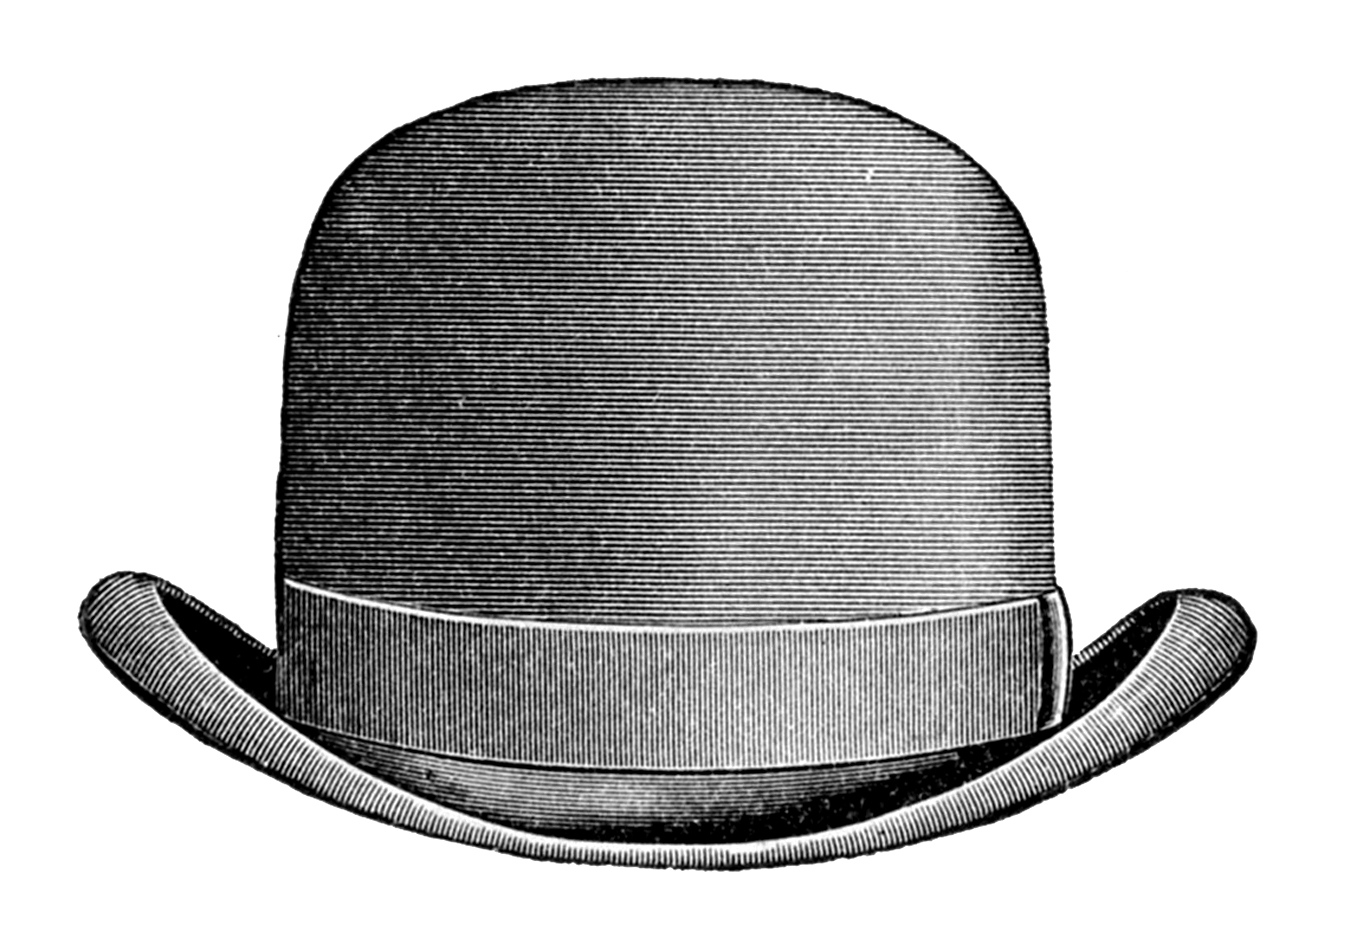 hats clipart old fashioned